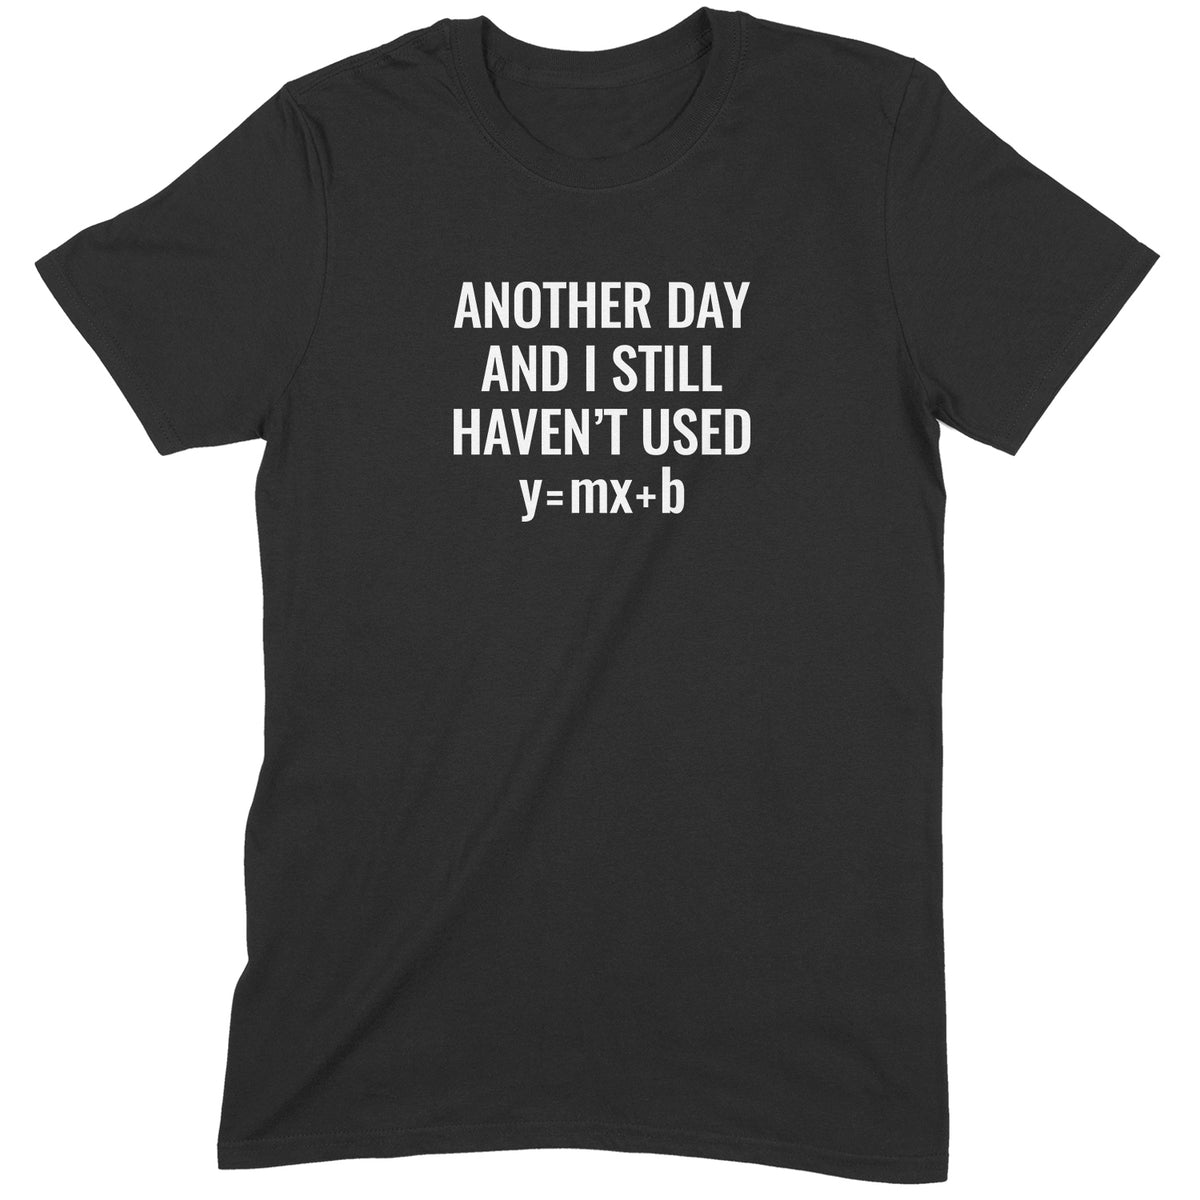 "Another Day" Premium Midweight Ringspun Cotton T-Shirt - Mens/Womens Fits